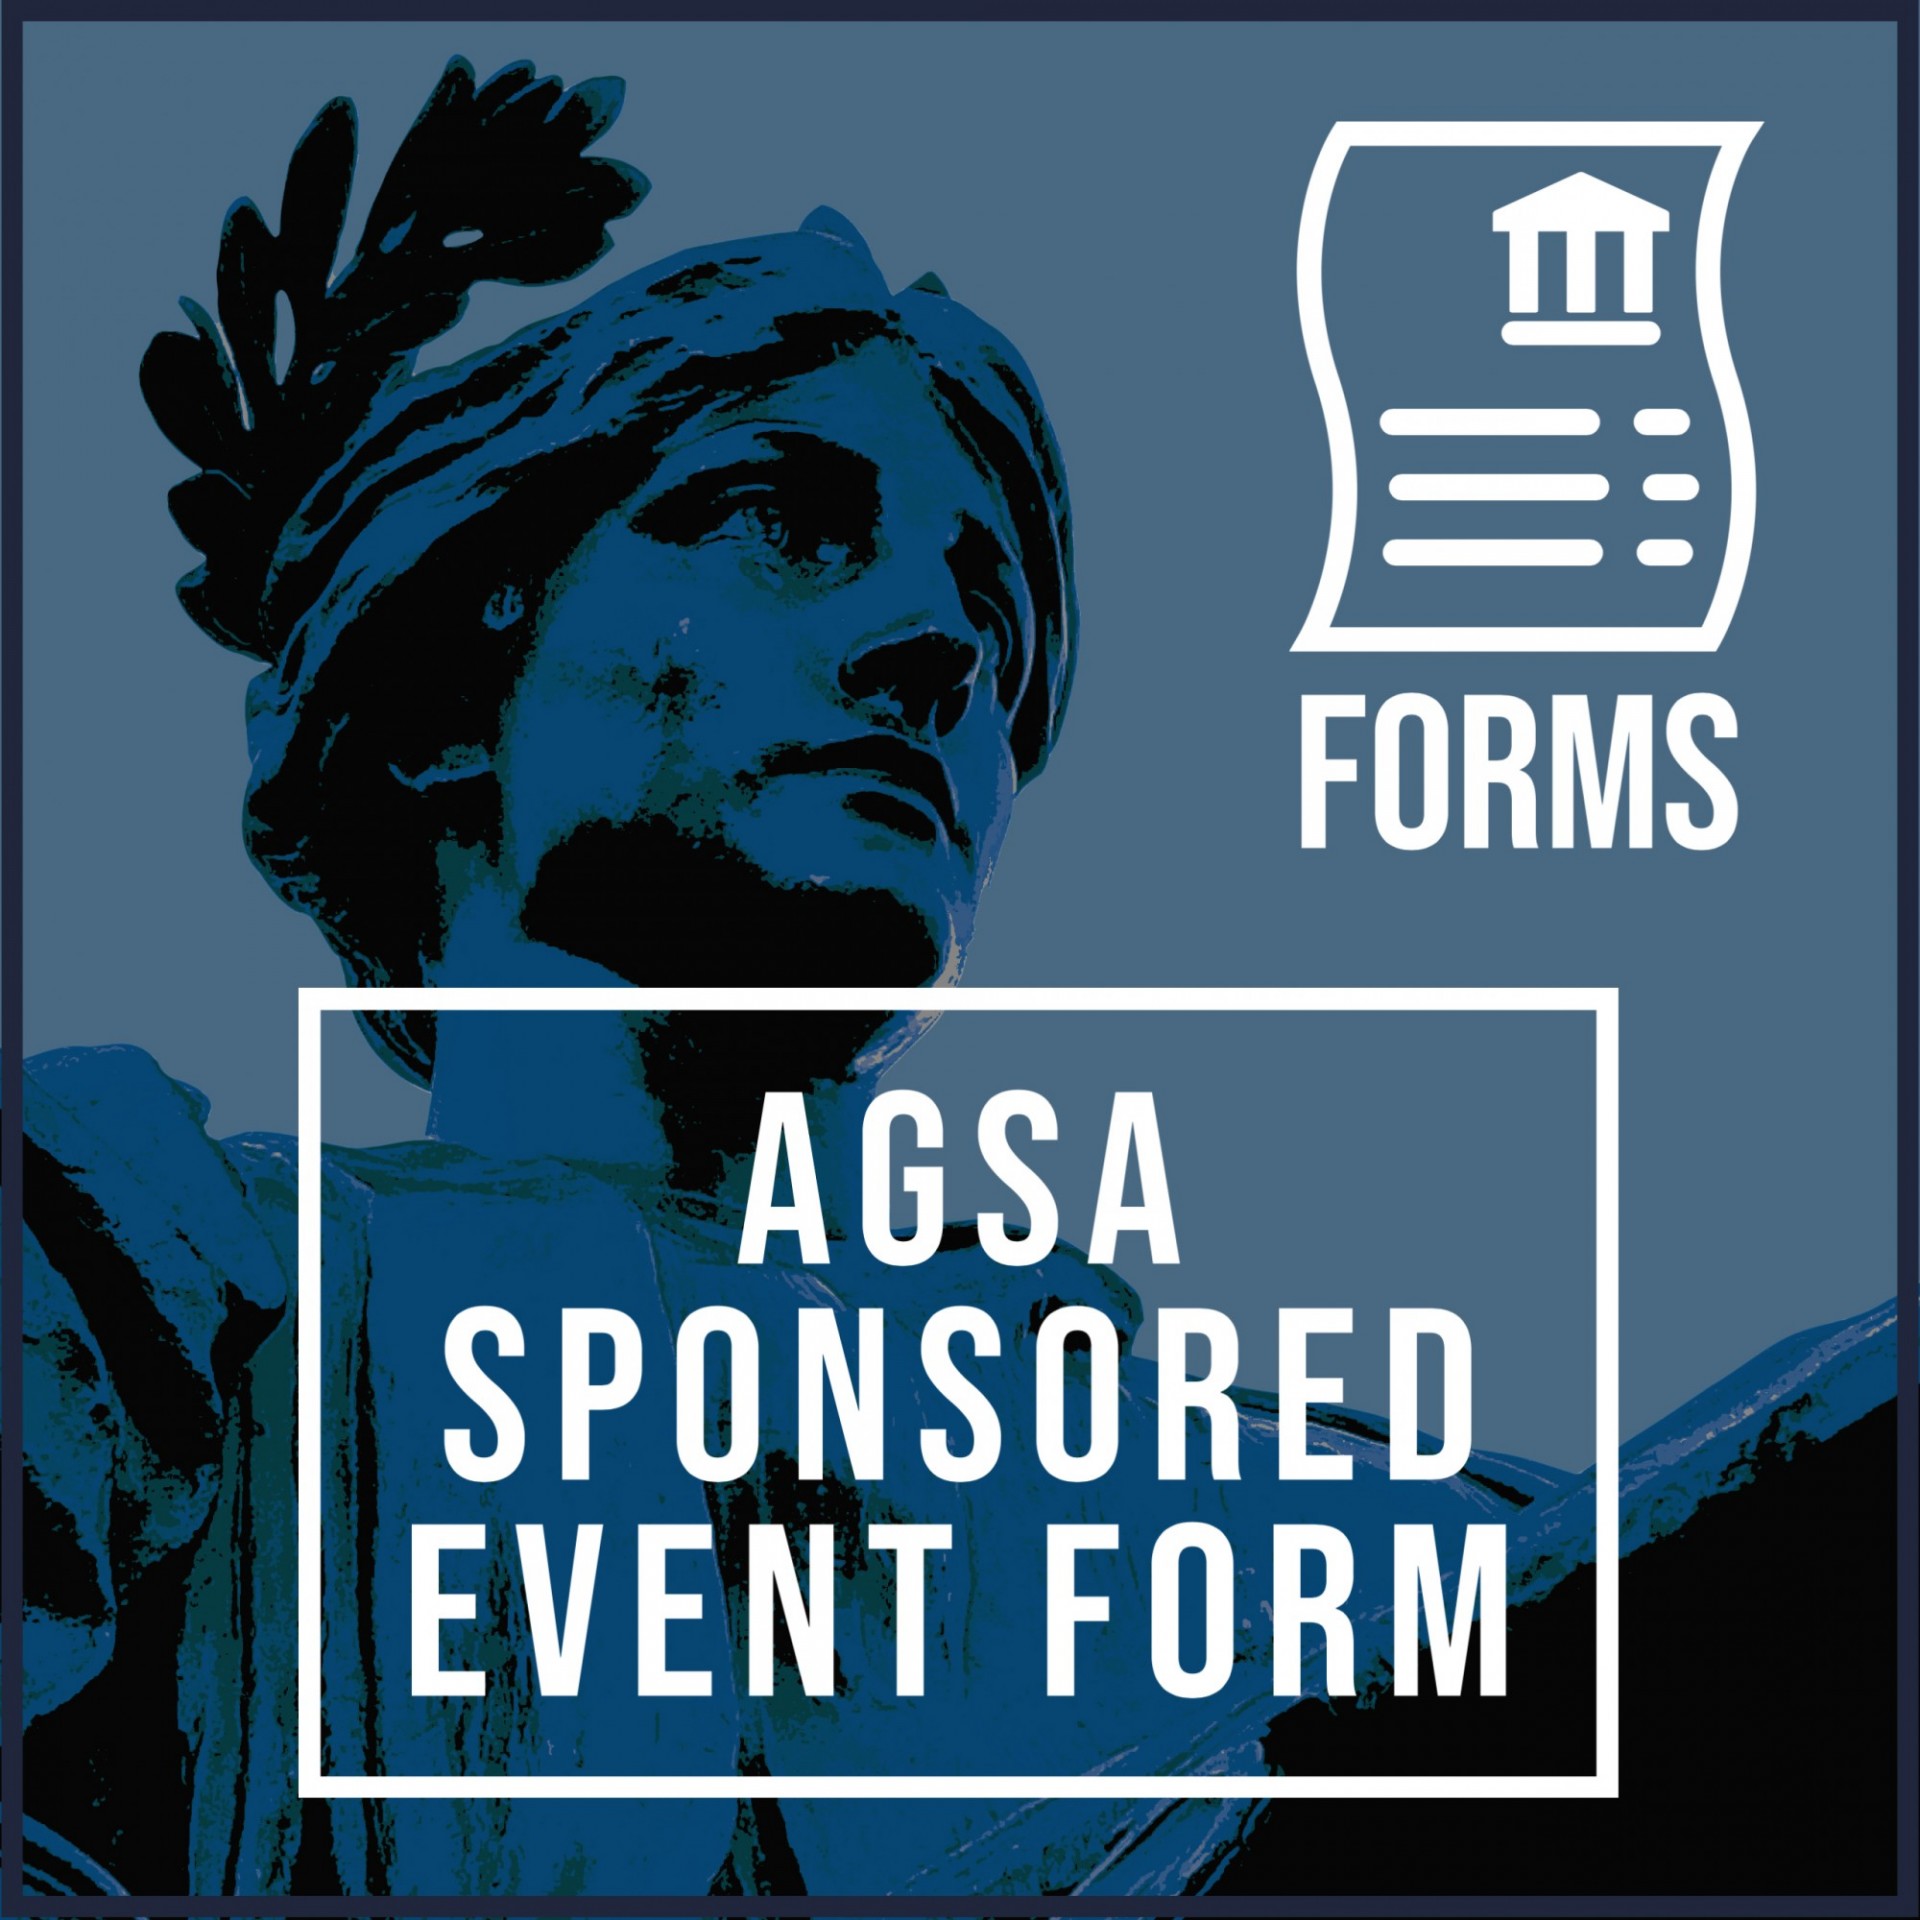 Forms Icon: AGSA SPONSORED EVENT